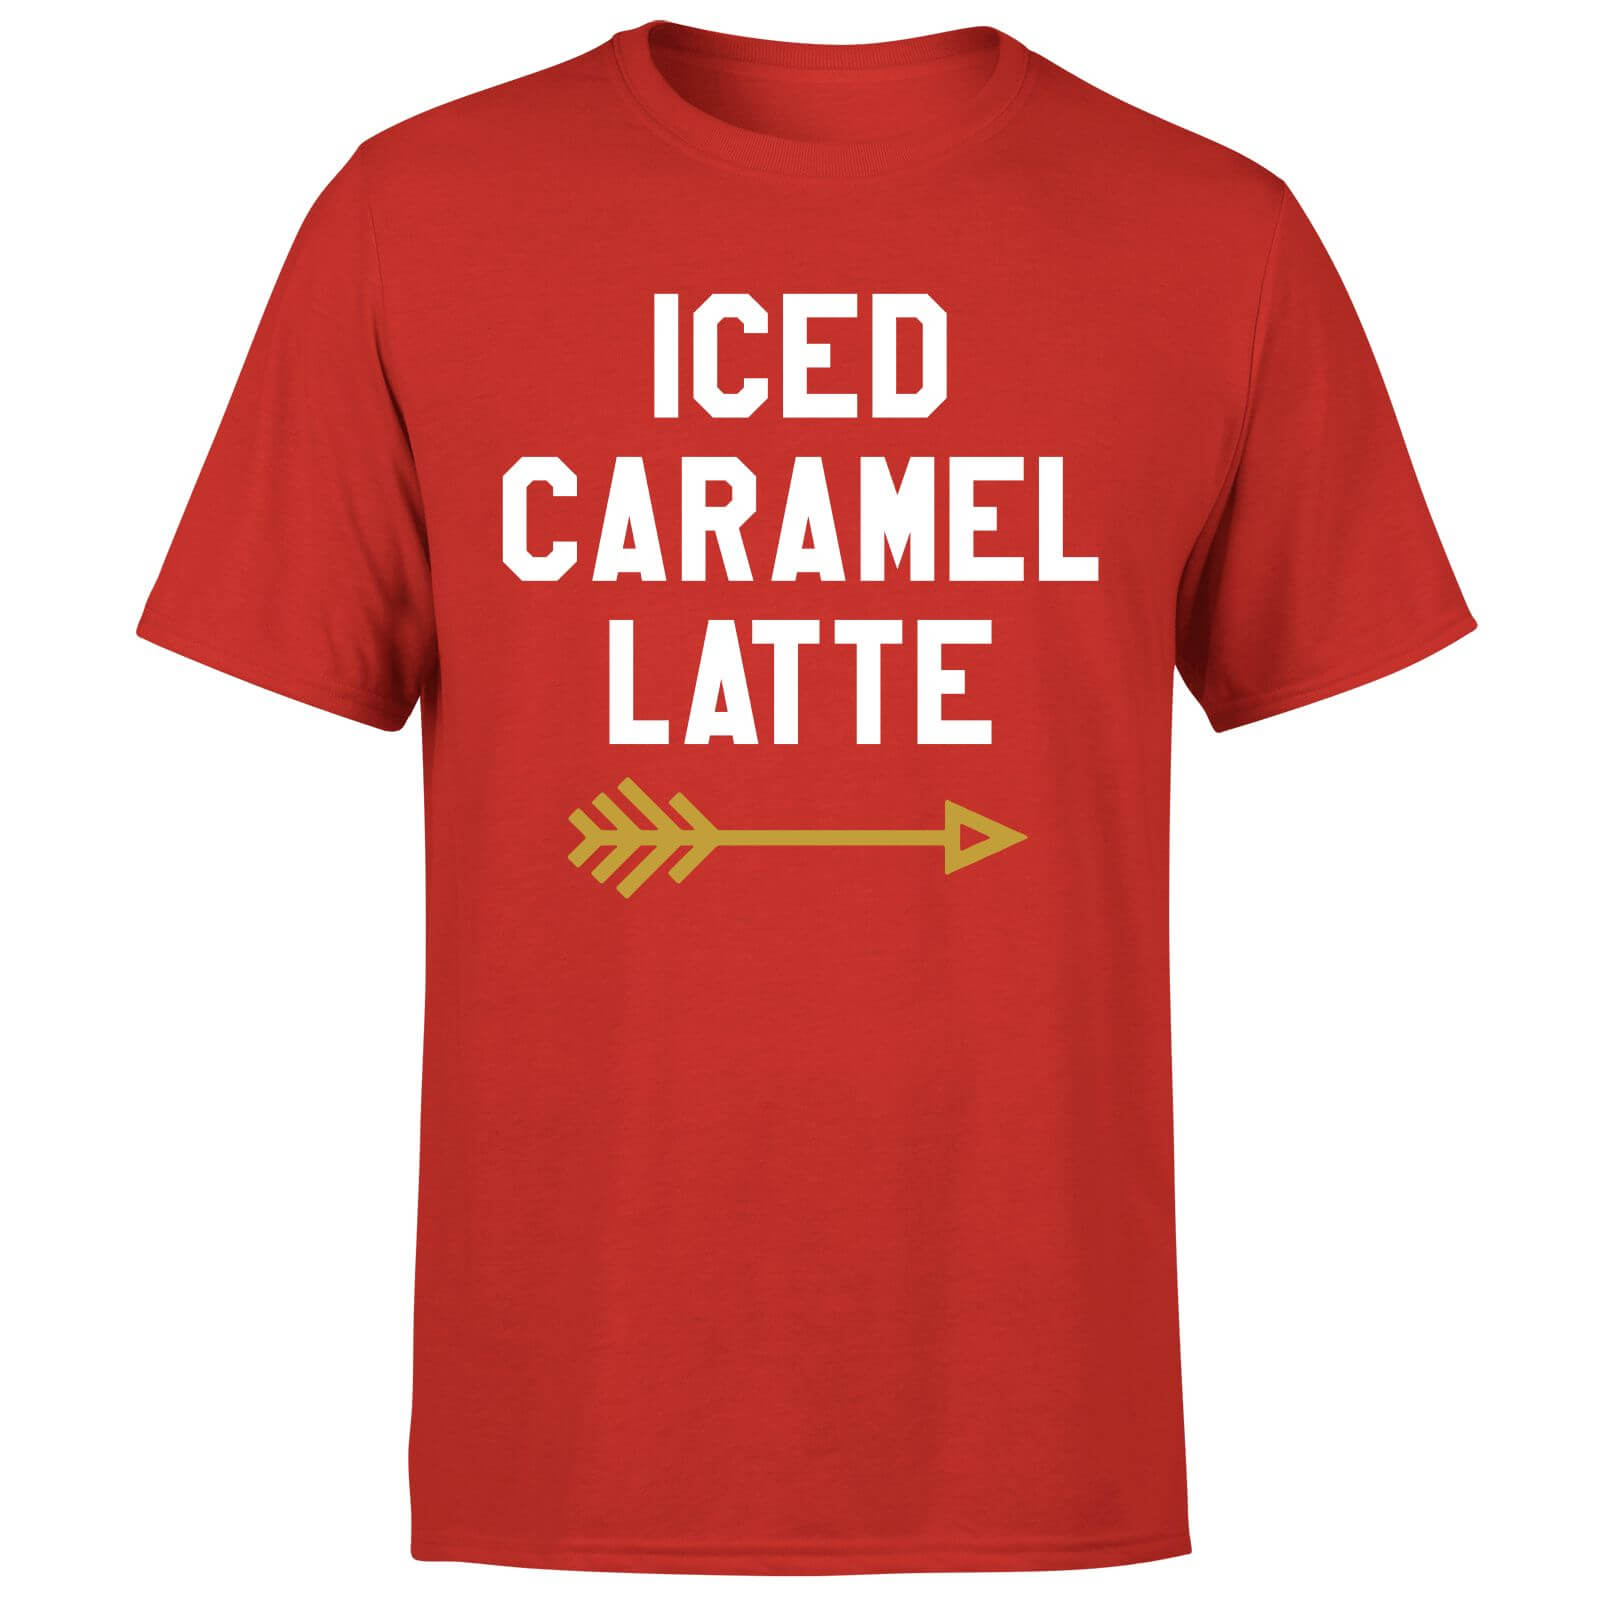 Iced Caramel Latte T-Shirt - Red - S - Red